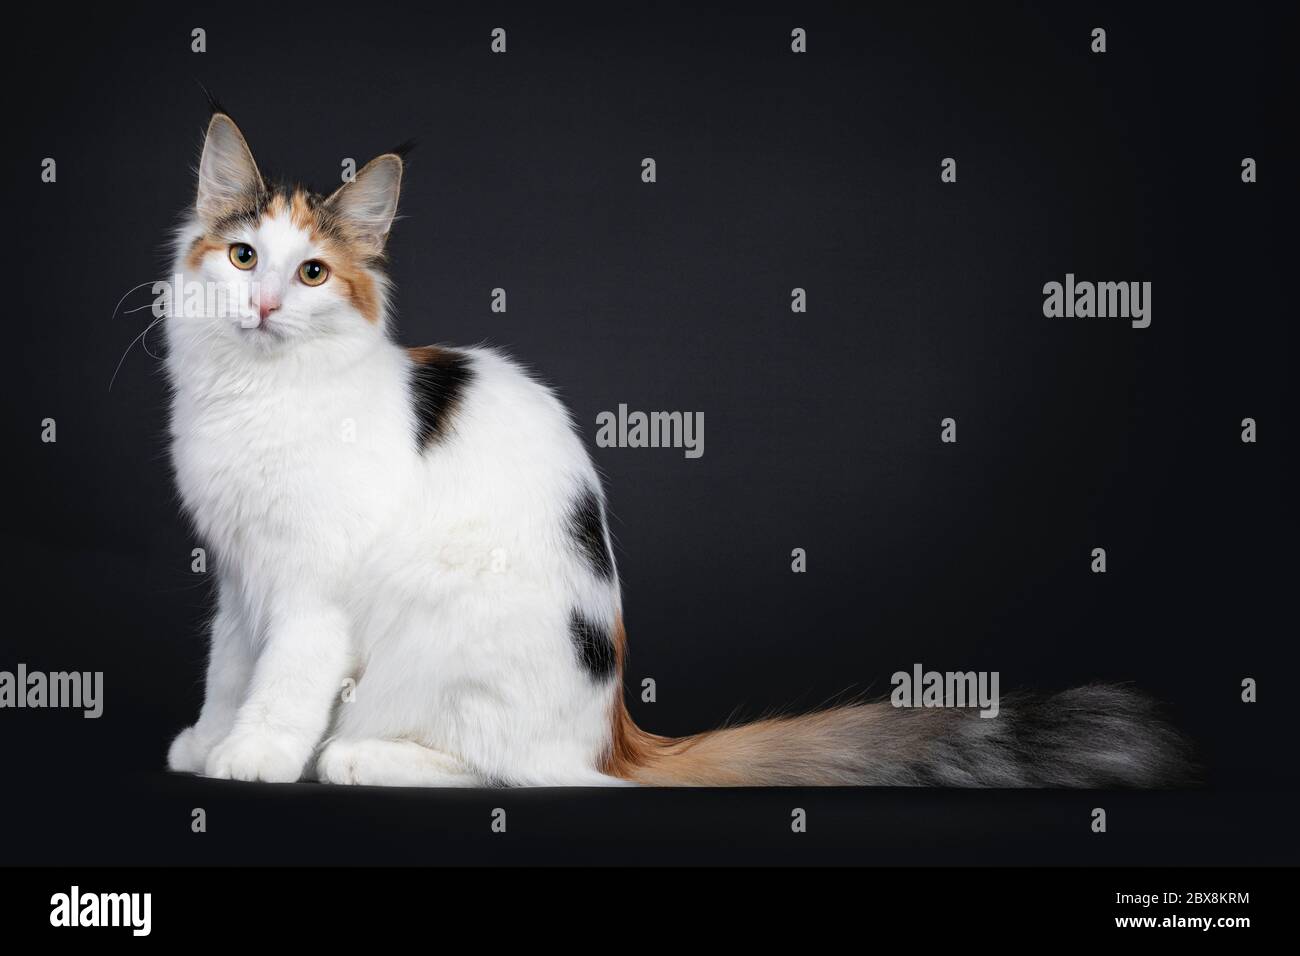 Cute young Norwegian Forestcat cat, sitting side ways. Looking straight at lens. Fluffy tail behind body. Isolated on black background. Stock Photo